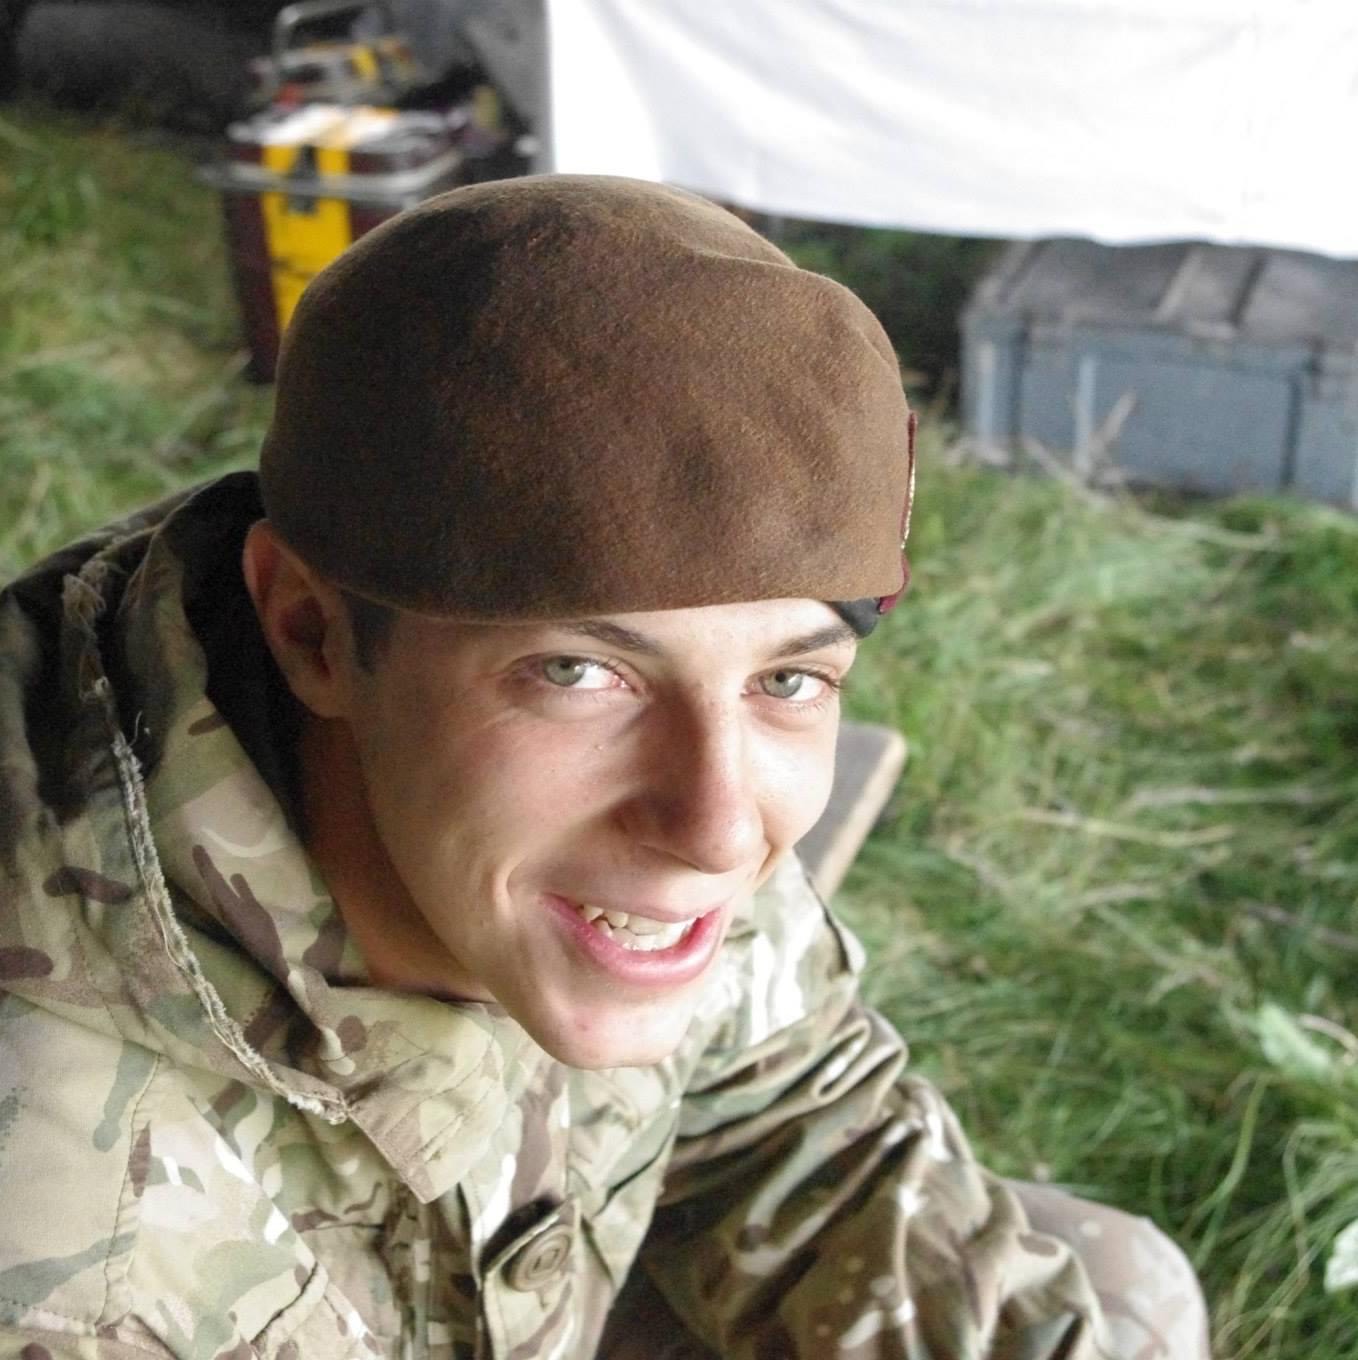 Luke Whitehead, 29, joined the prison service after 12 years in the Army